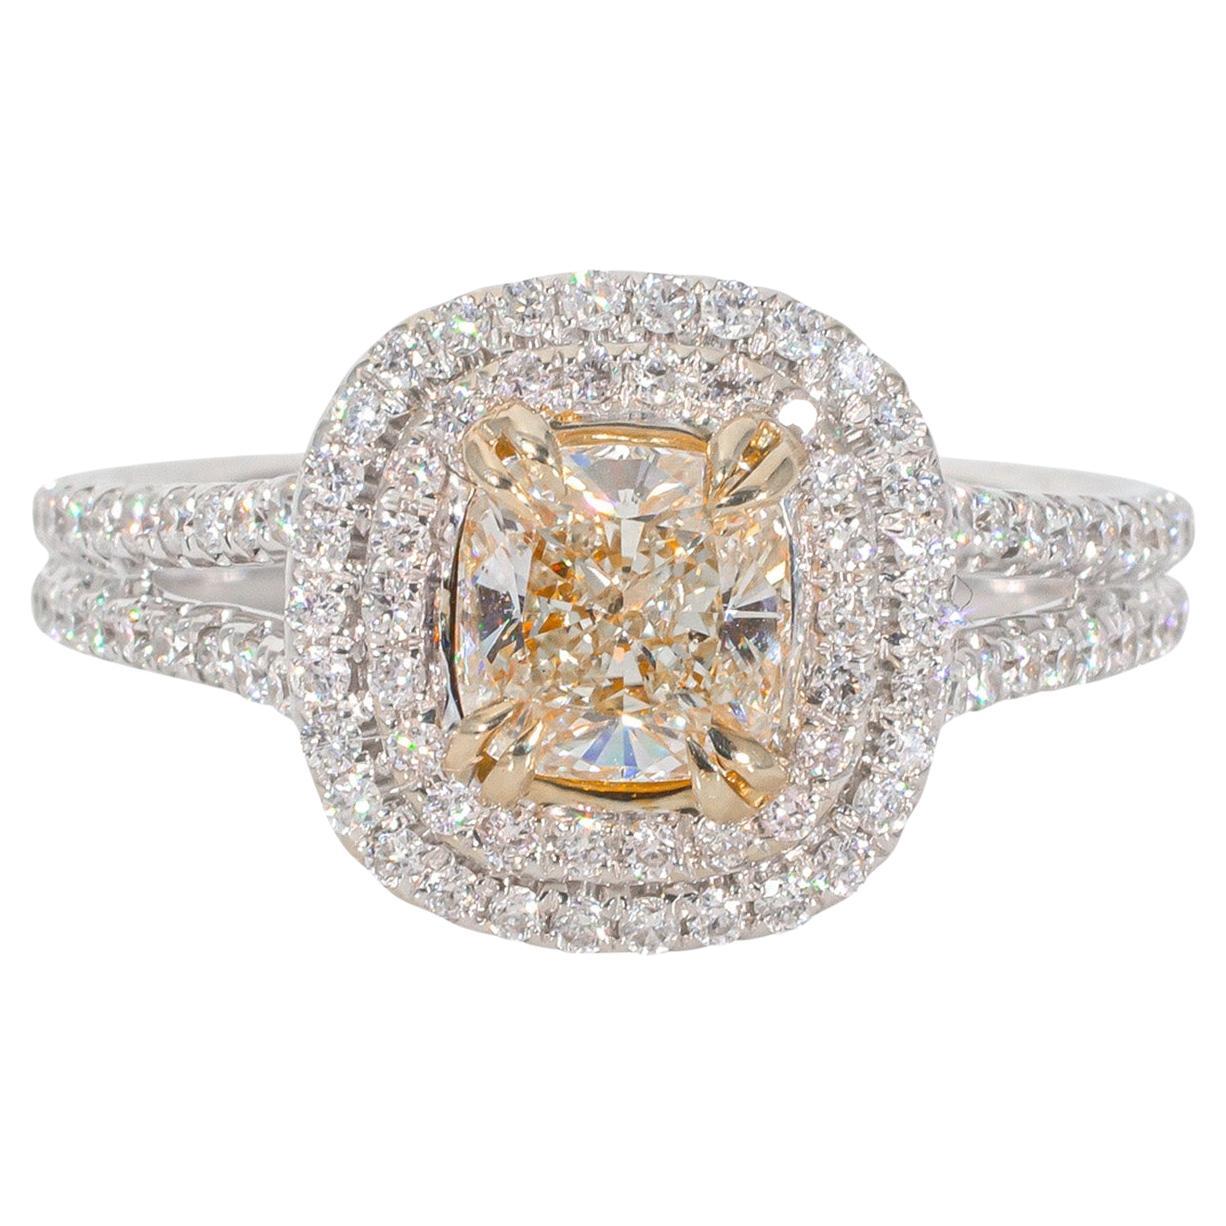 Double Halo Ring in 18K WG with Fancy Yellow Cushion Diamond Center. D1.37ct. For Sale